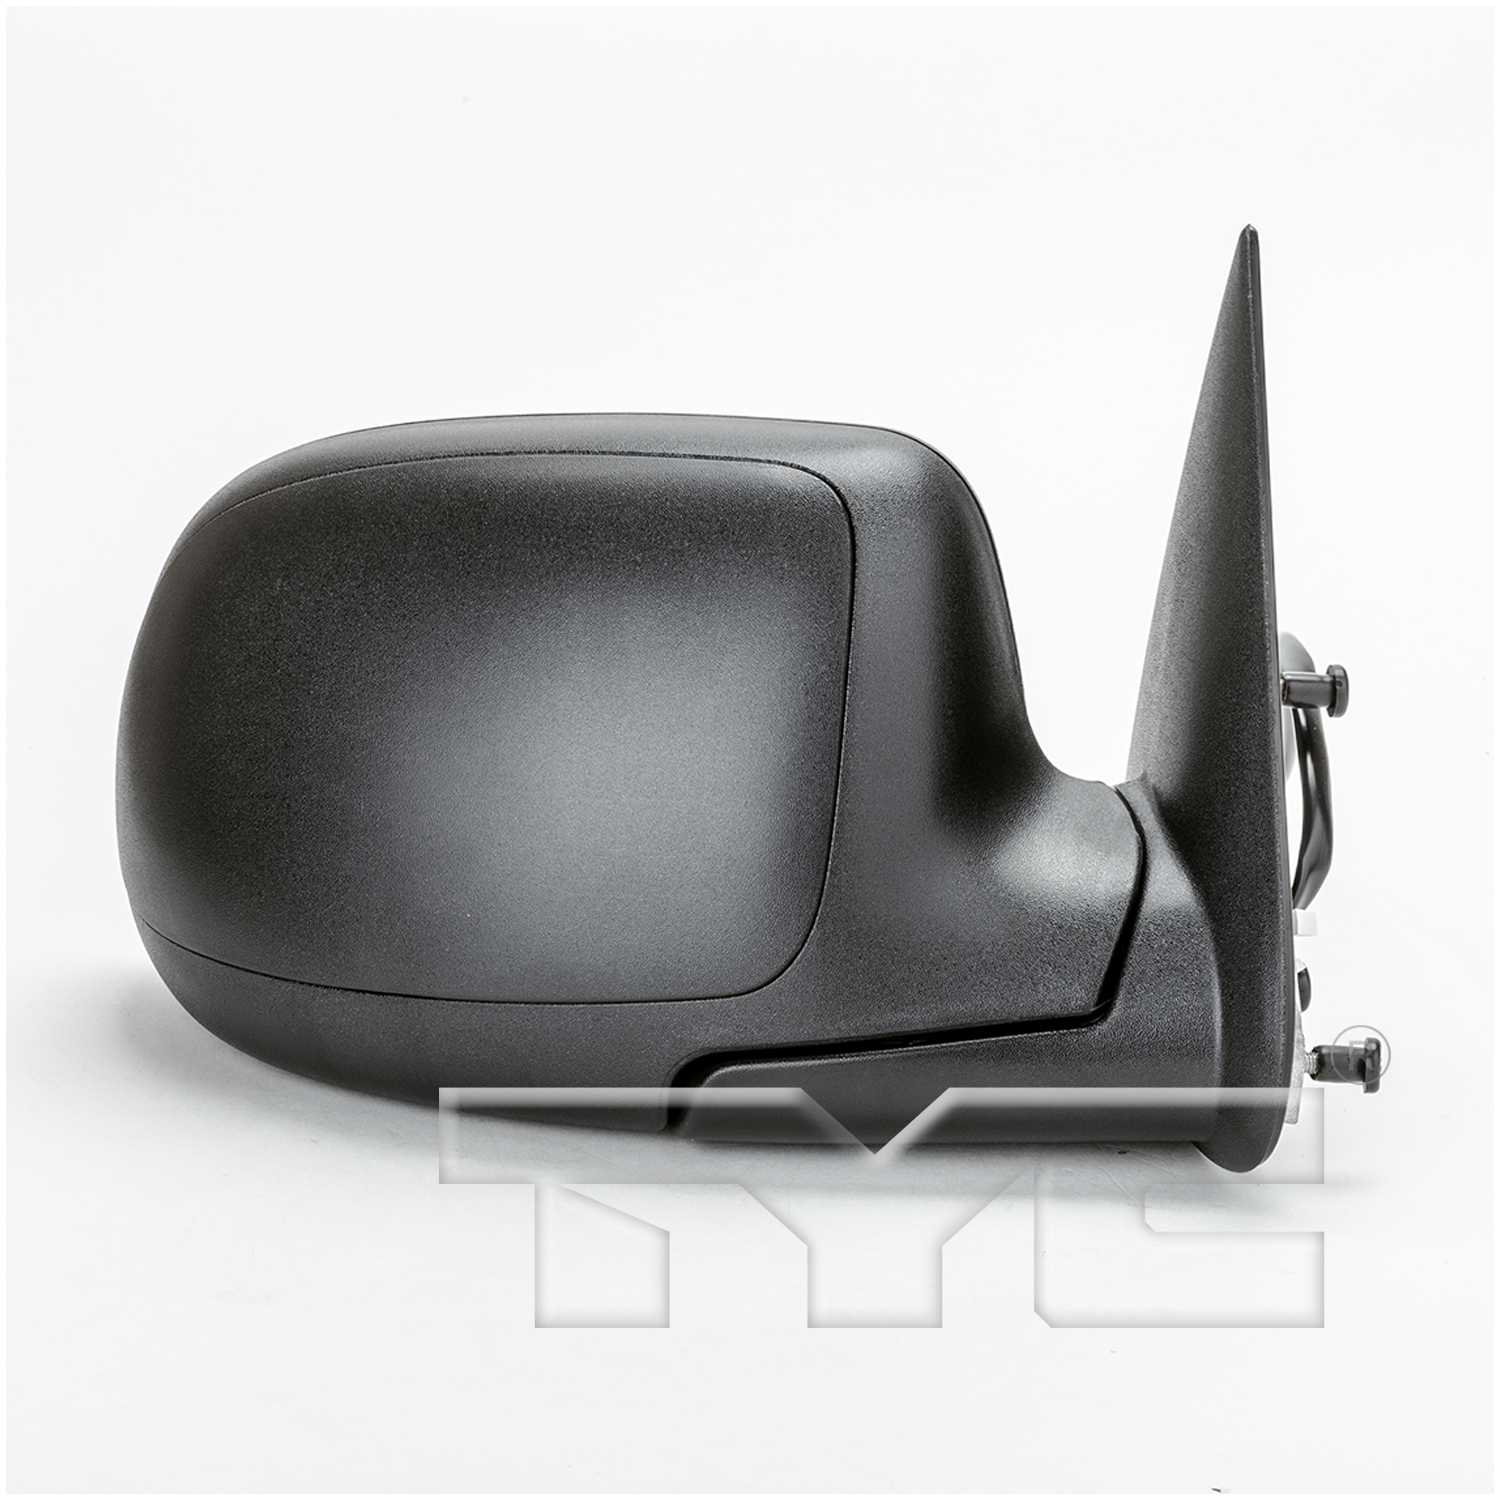 Aftermarket MIRRORS for CHEVROLET - AVALANCHE 2500, AVALANCHE 2500,03-06,RT Mirror outside rear view